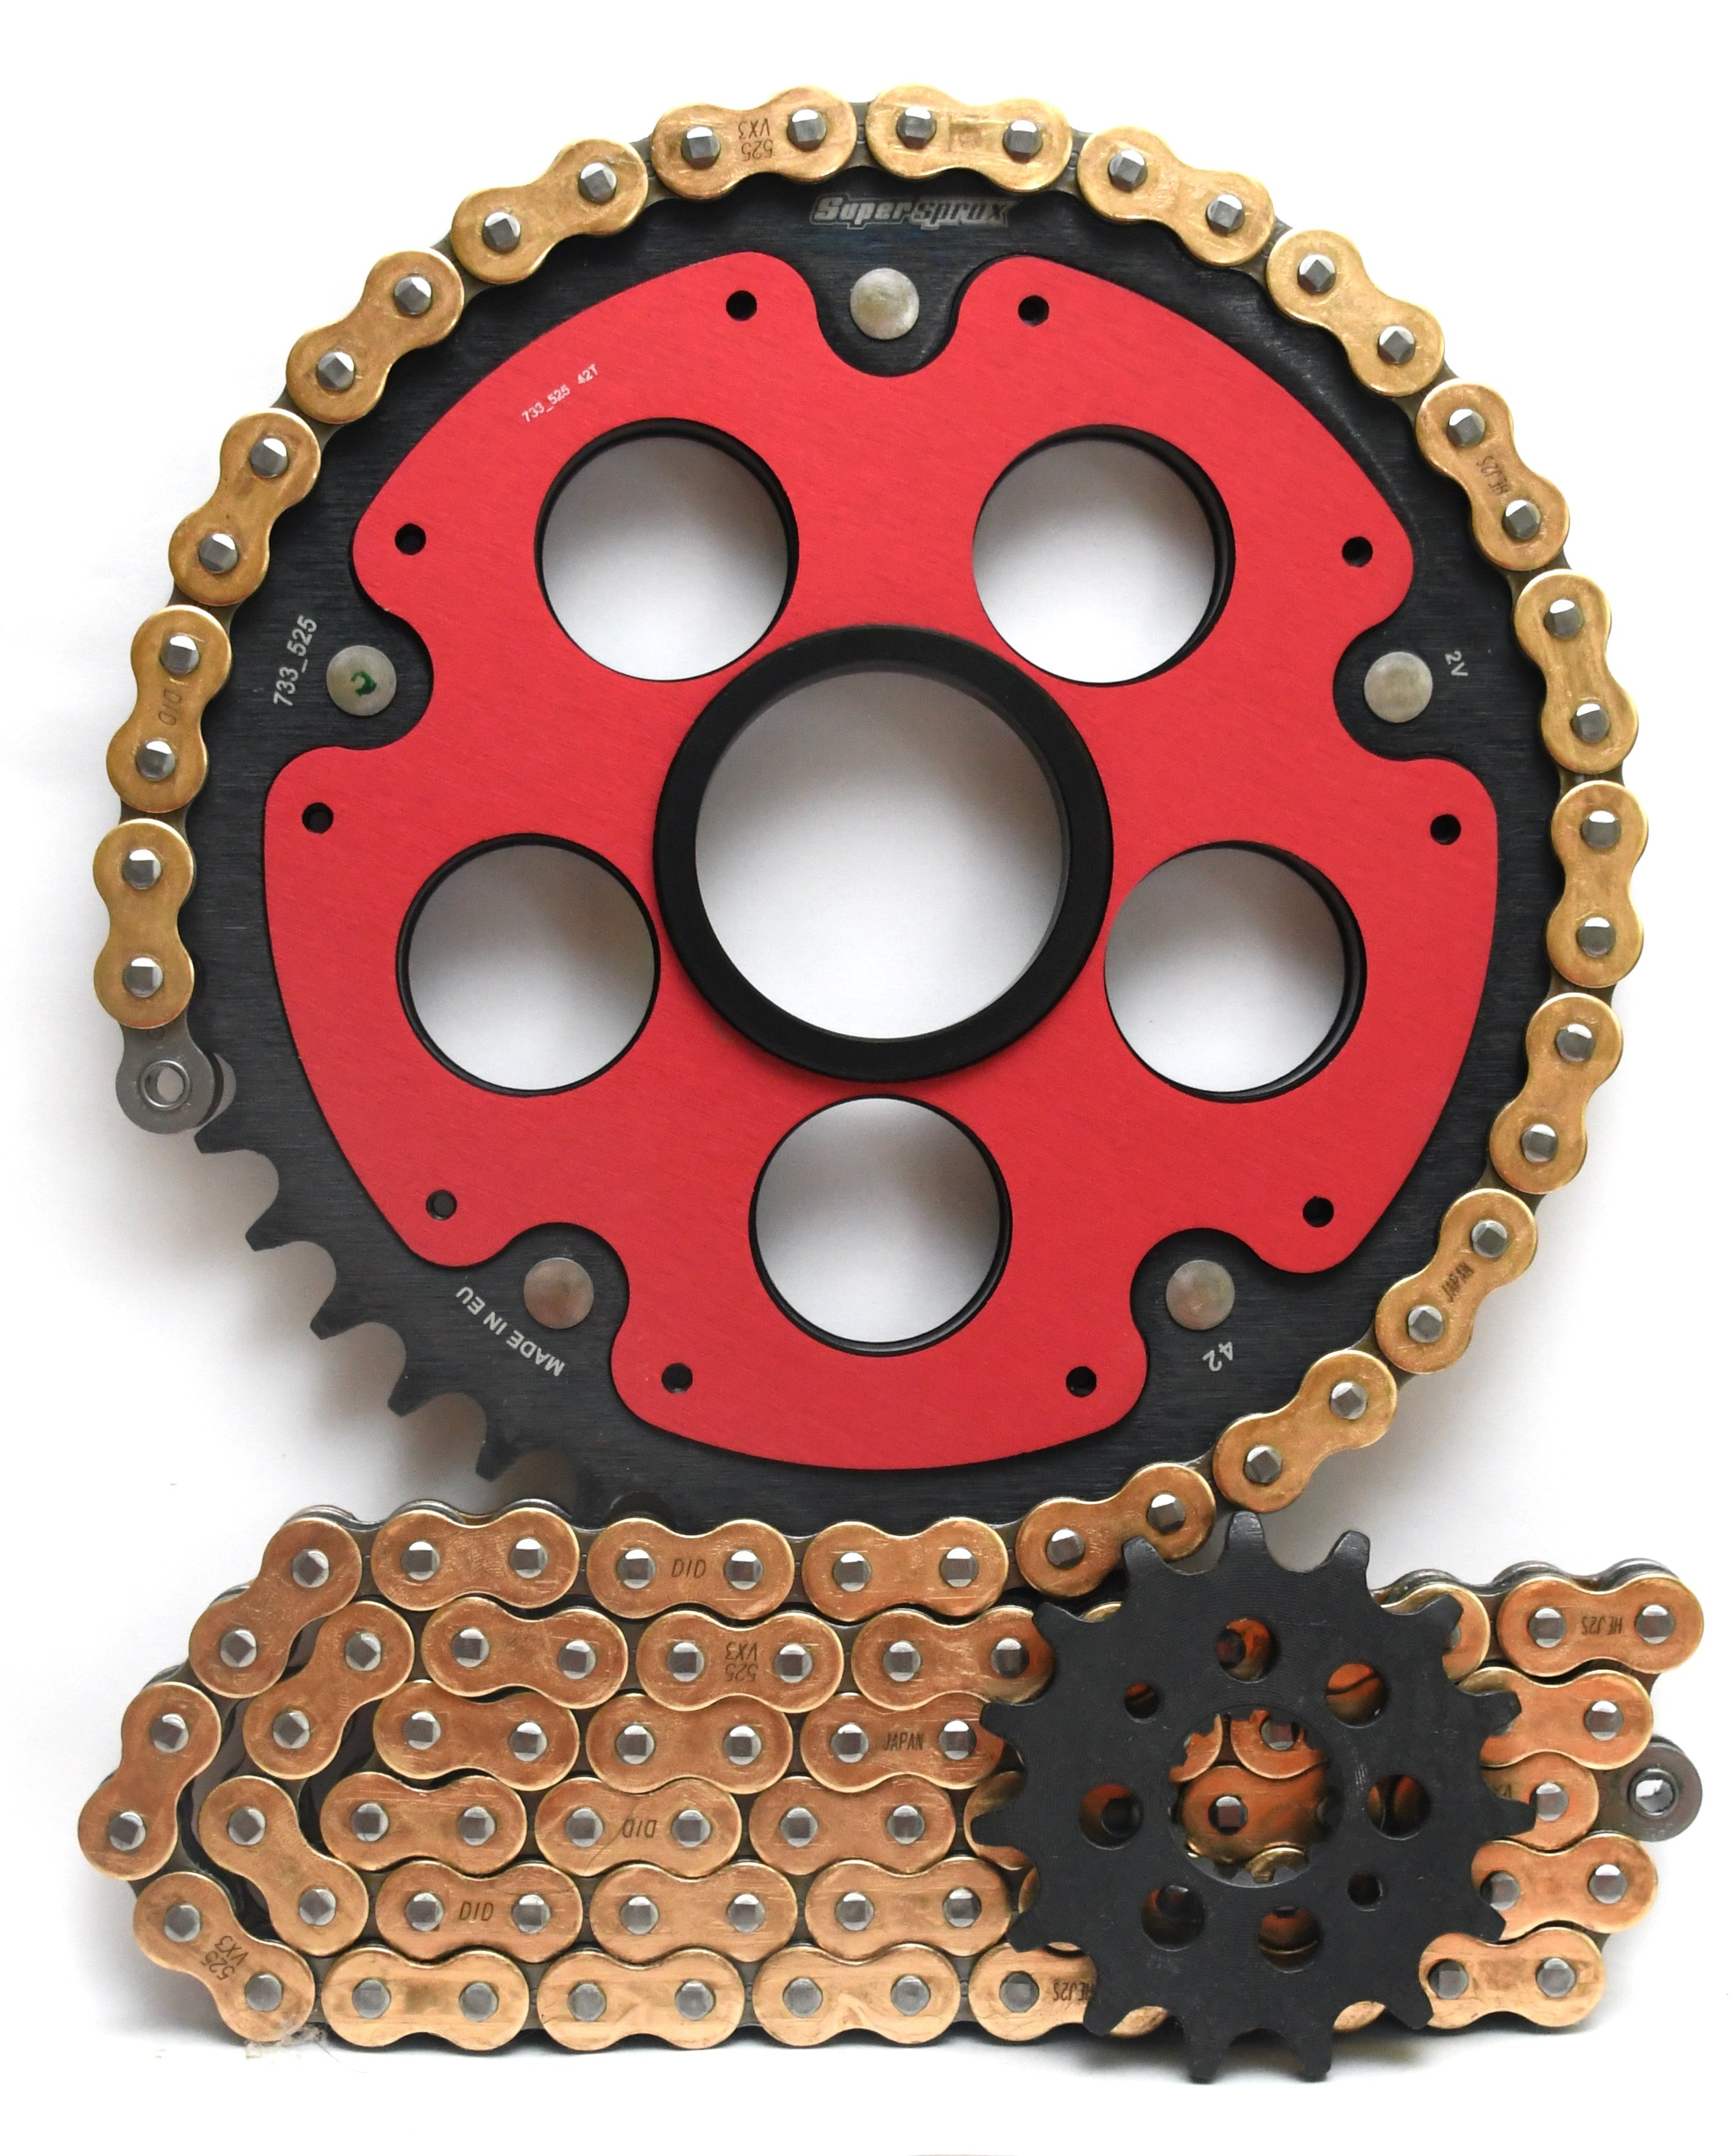 Supersprox Chain & Sprocket Kit for Ducati Multistrada 1000/1100 (S) 2003-2009 - Standard Gearing